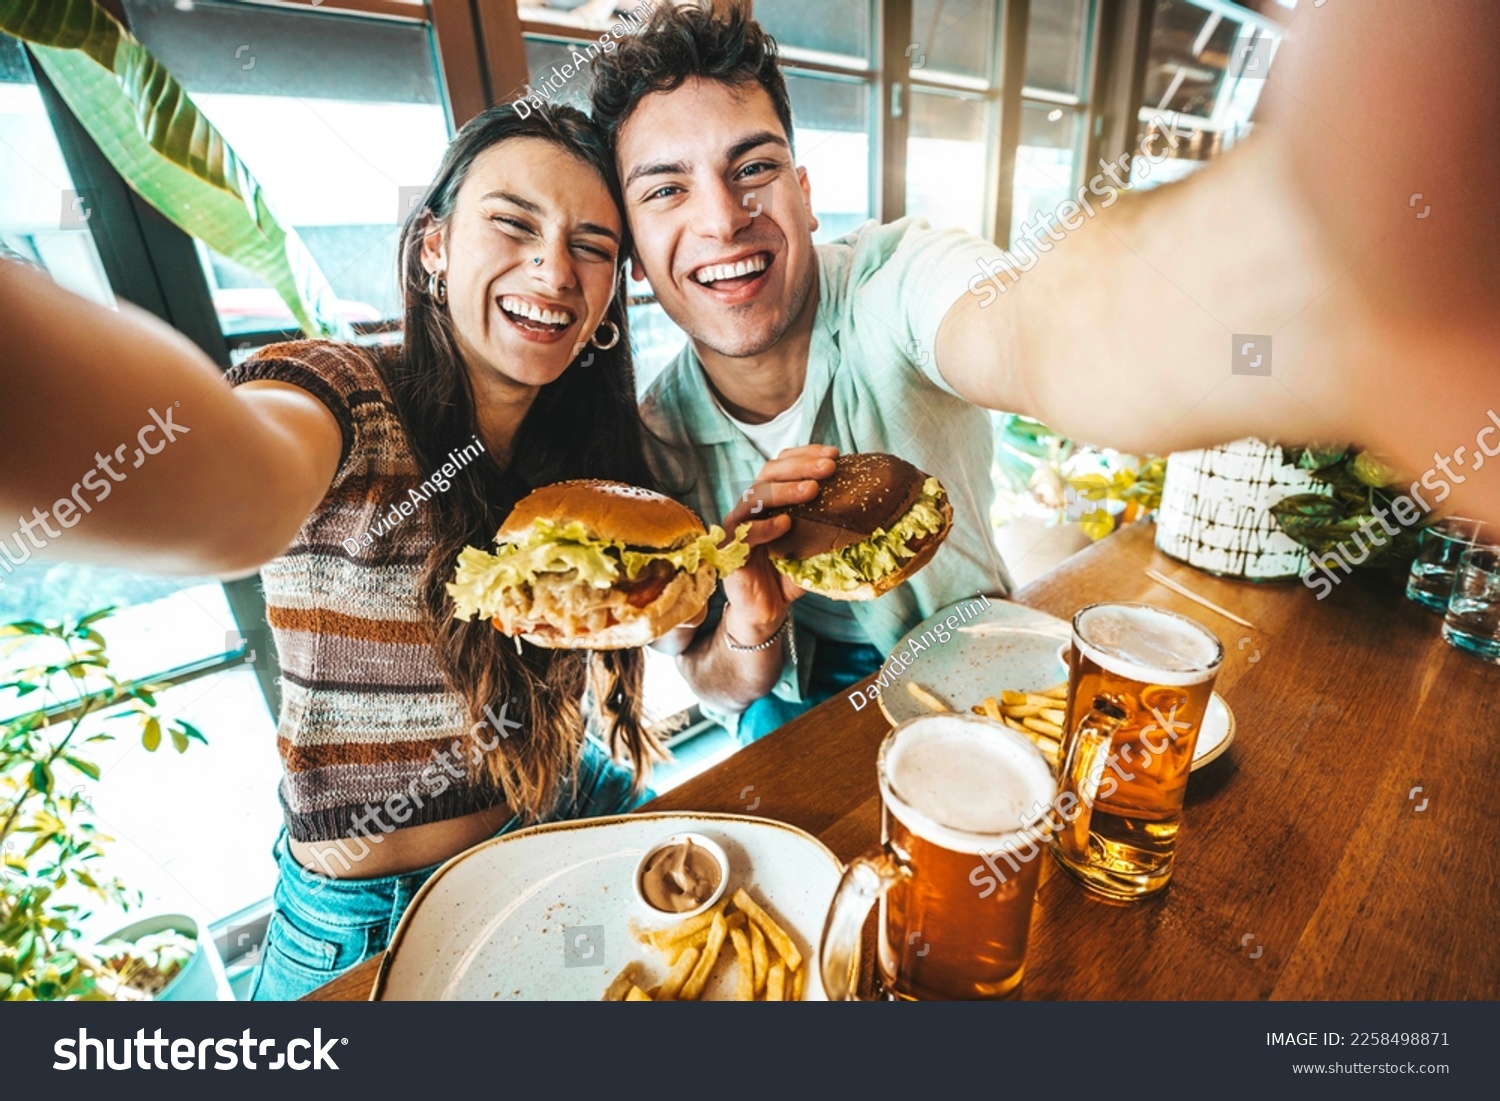 Happy couple taking selfie with smart mobile phone at burger pub restaurant - Young people having lunch break at cafe bar venue - Life style concept with guy and girl hanging out on weekend day  #2258498871